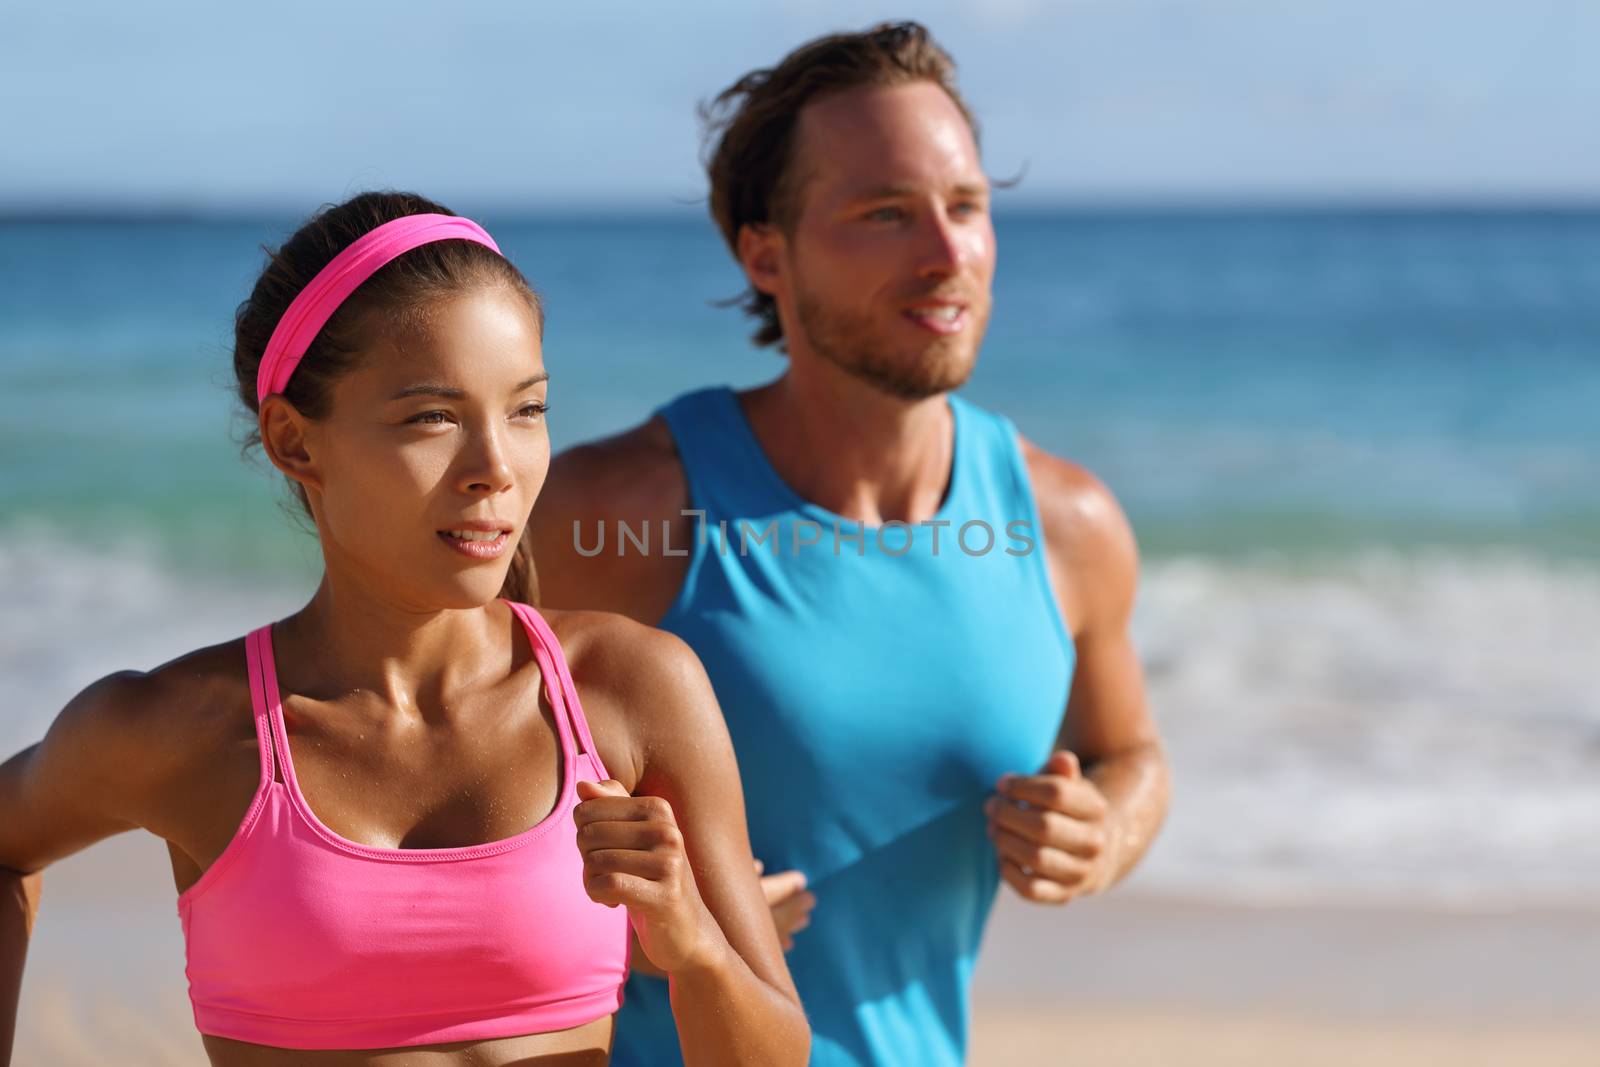 Couple runners running on beach. Interracial young adults asian woman, caucasian man, training cardio together doing outdoor workout jogging by Maridav